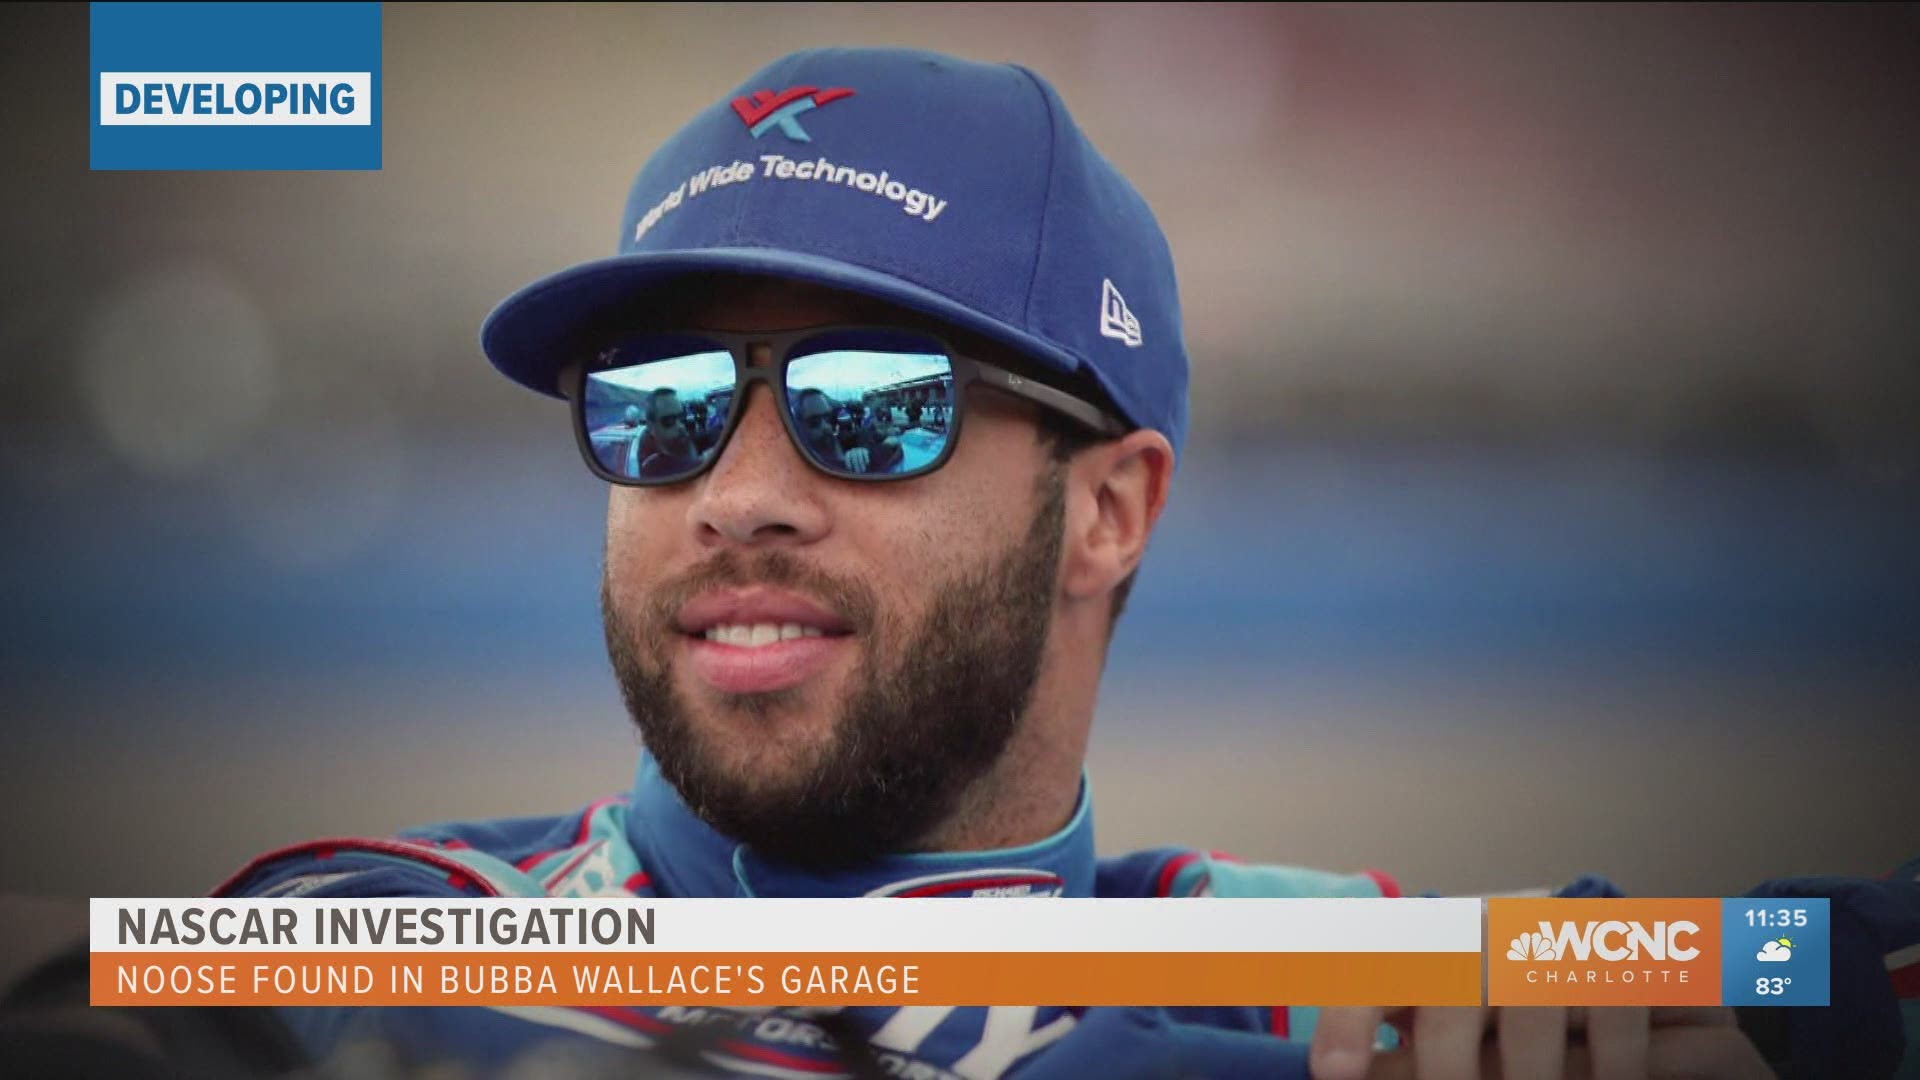 NASCAR says they are "angry and outraged" after a crew member found a noose in the garage stall of Bubba Wallace, the lone black driver in the Cup Series.